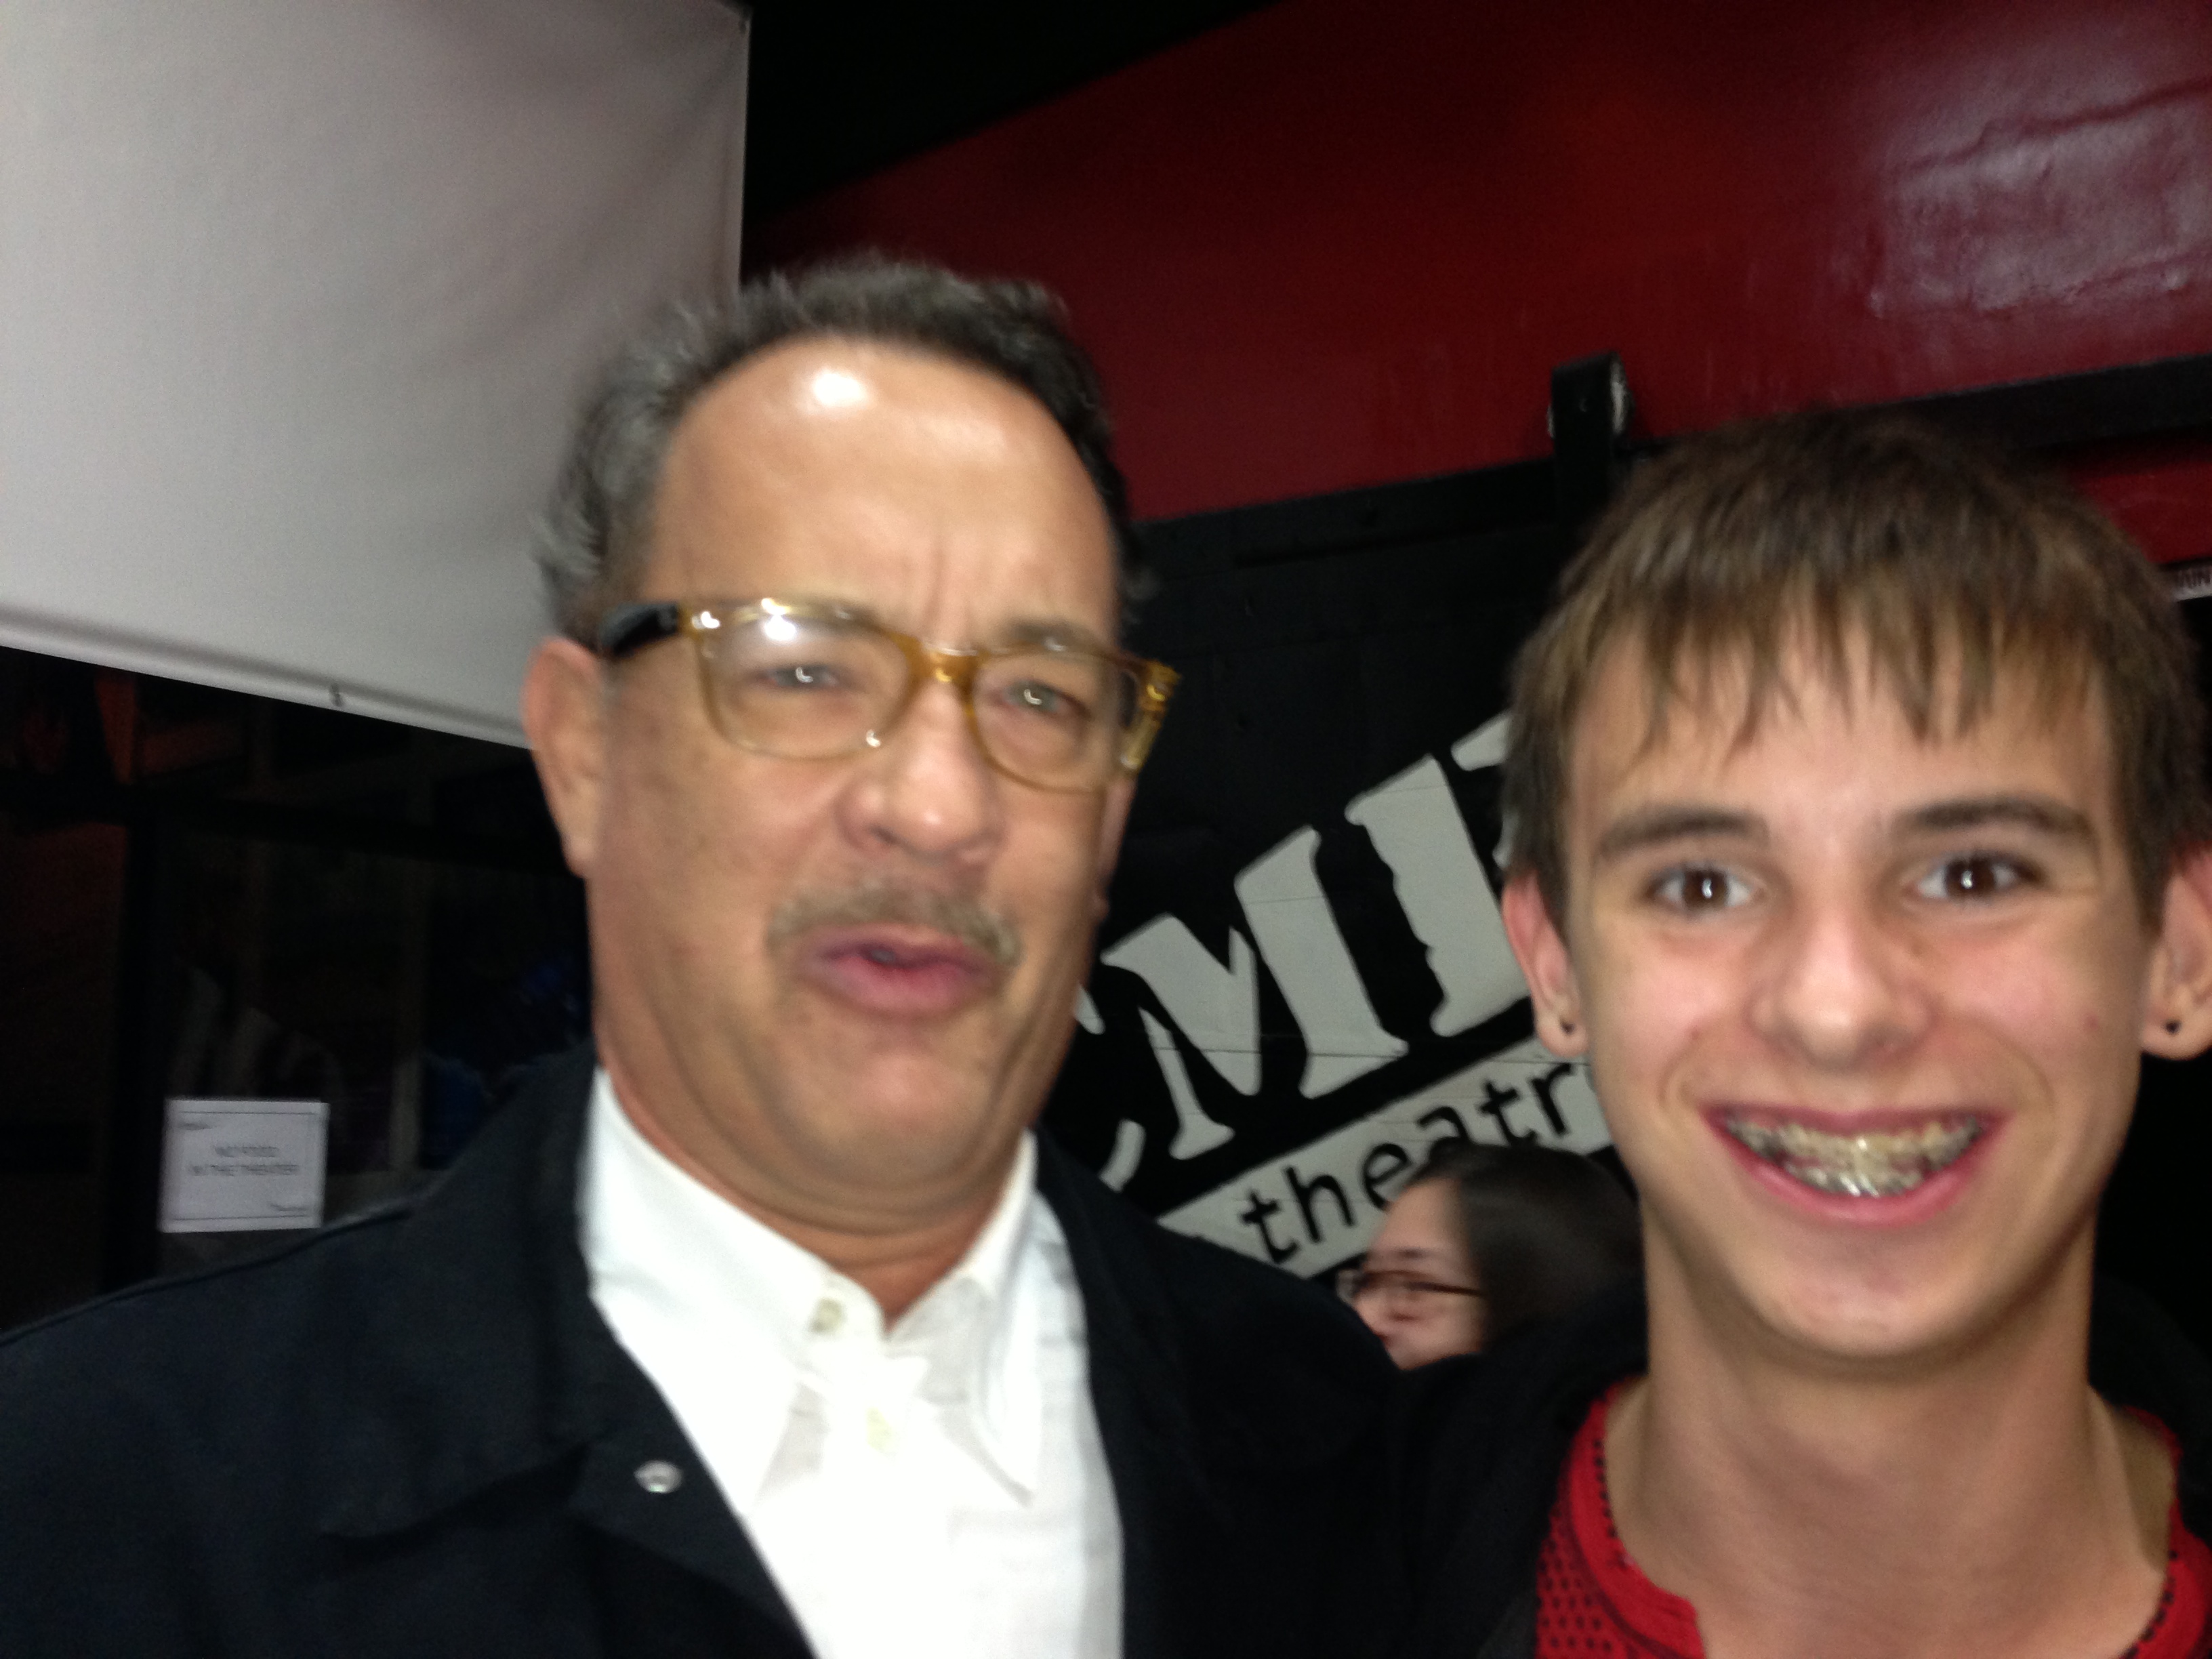 Brendon at Acme Theater with Tom Hanks